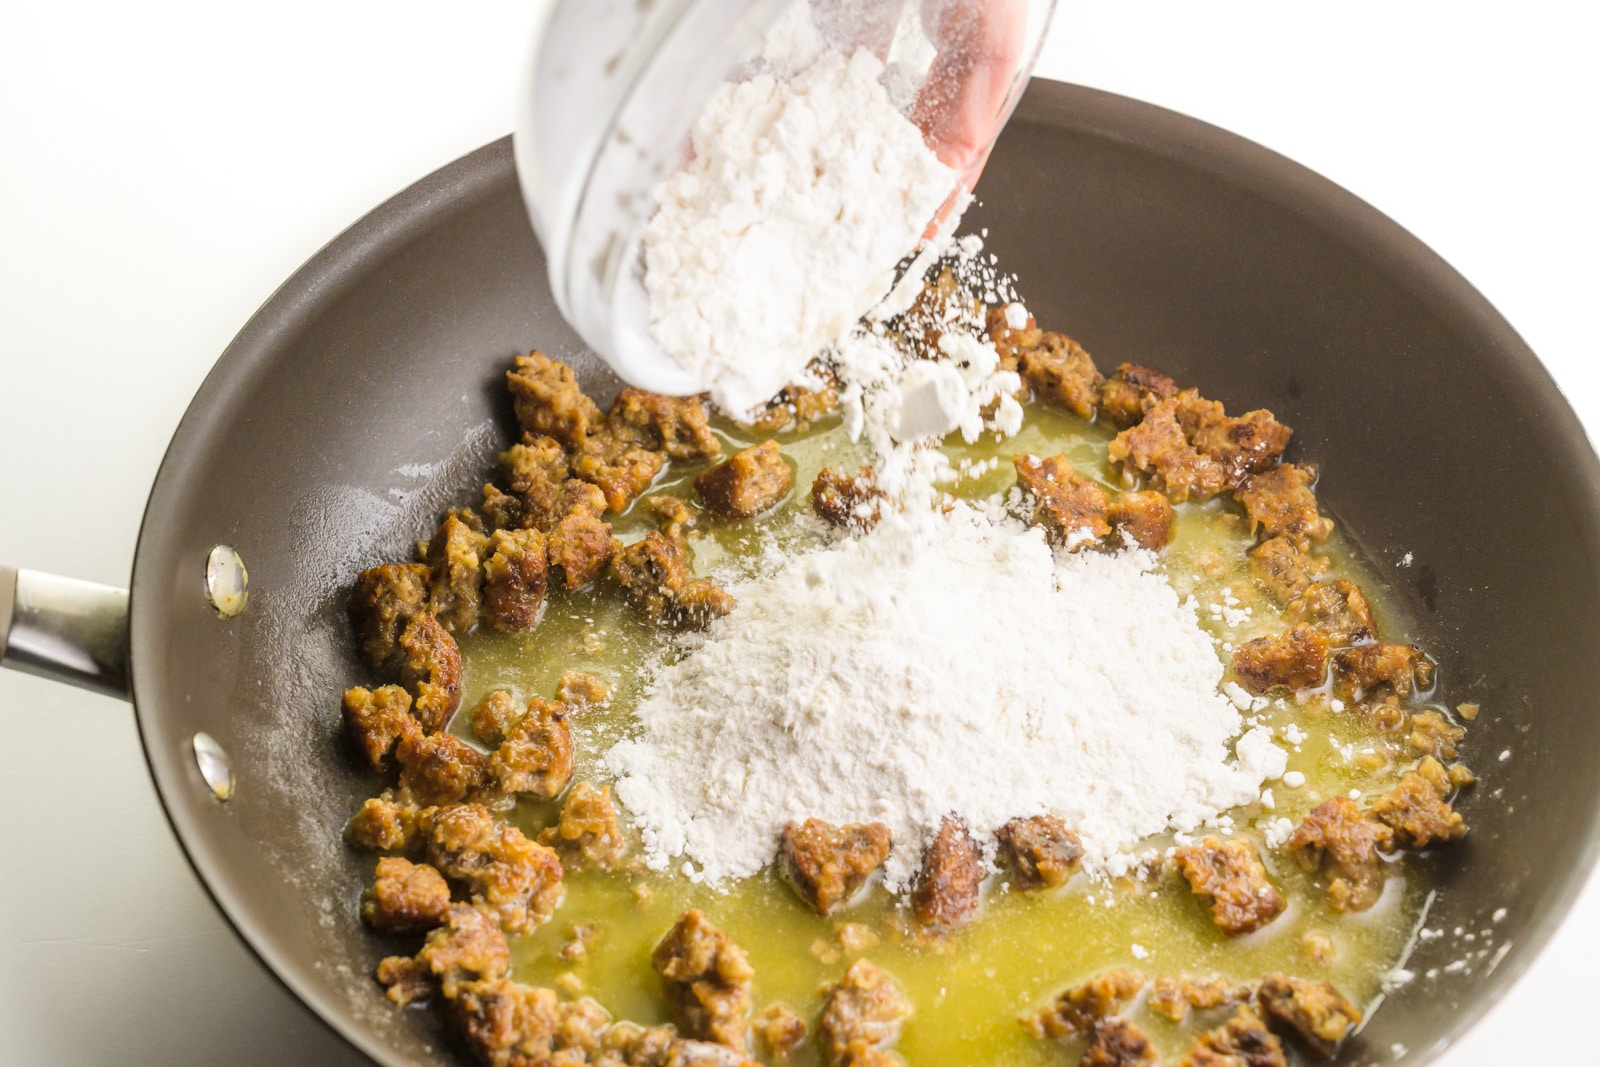 Flour is being poured into a skillet with other ingredients.